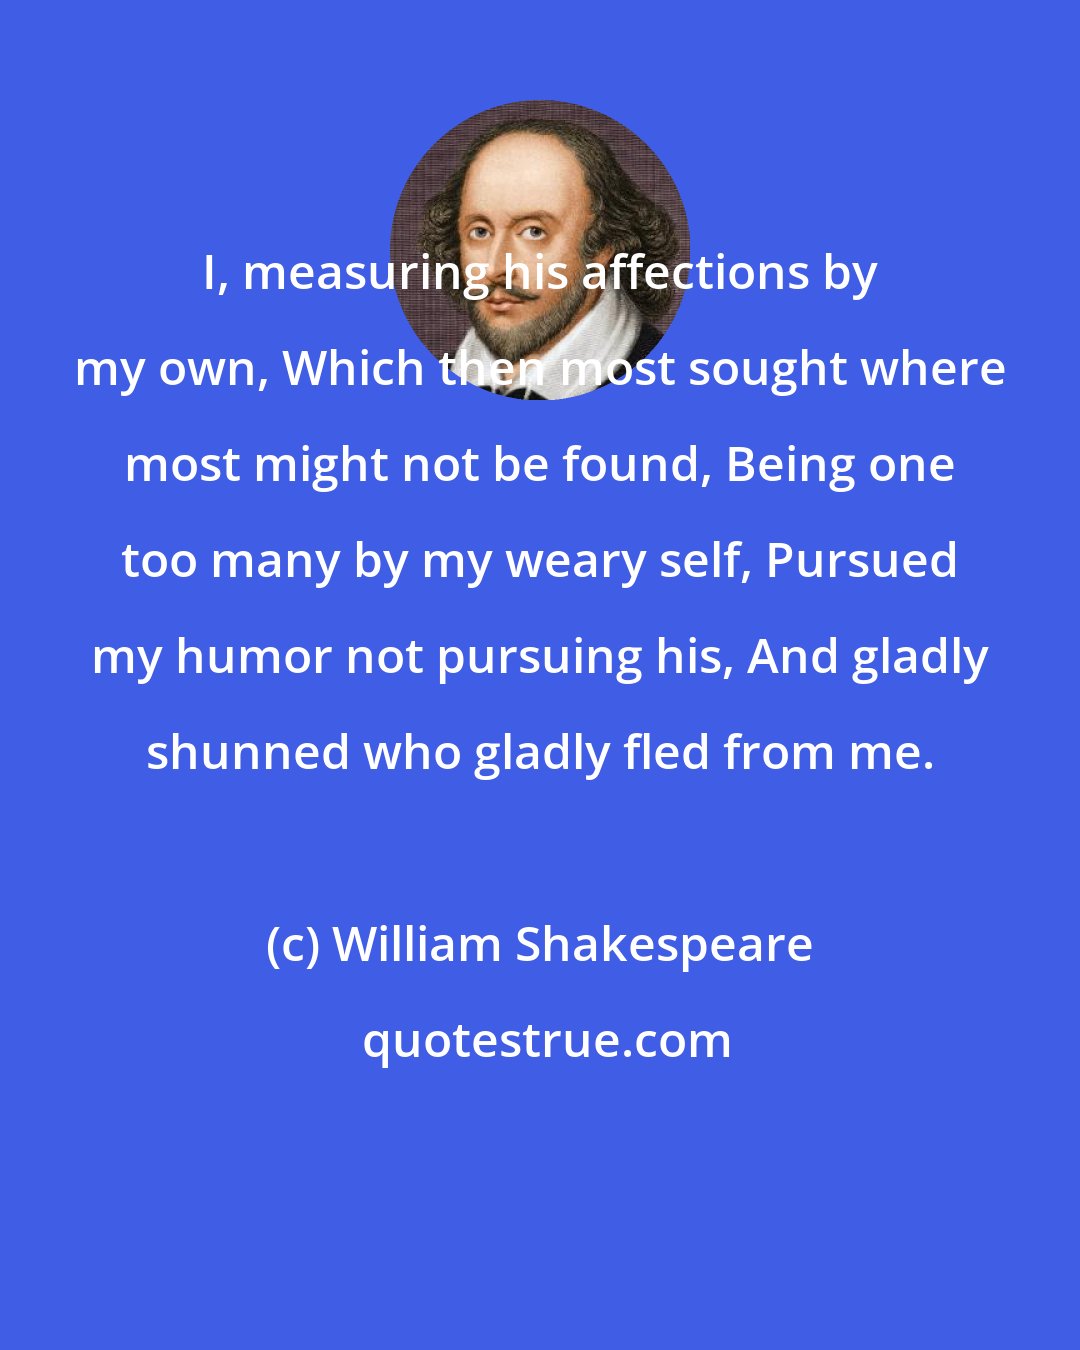 William Shakespeare: I, measuring his affections by my own, Which then most sought where most might not be found, Being one too many by my weary self, Pursued my humor not pursuing his, And gladly shunned who gladly fled from me.